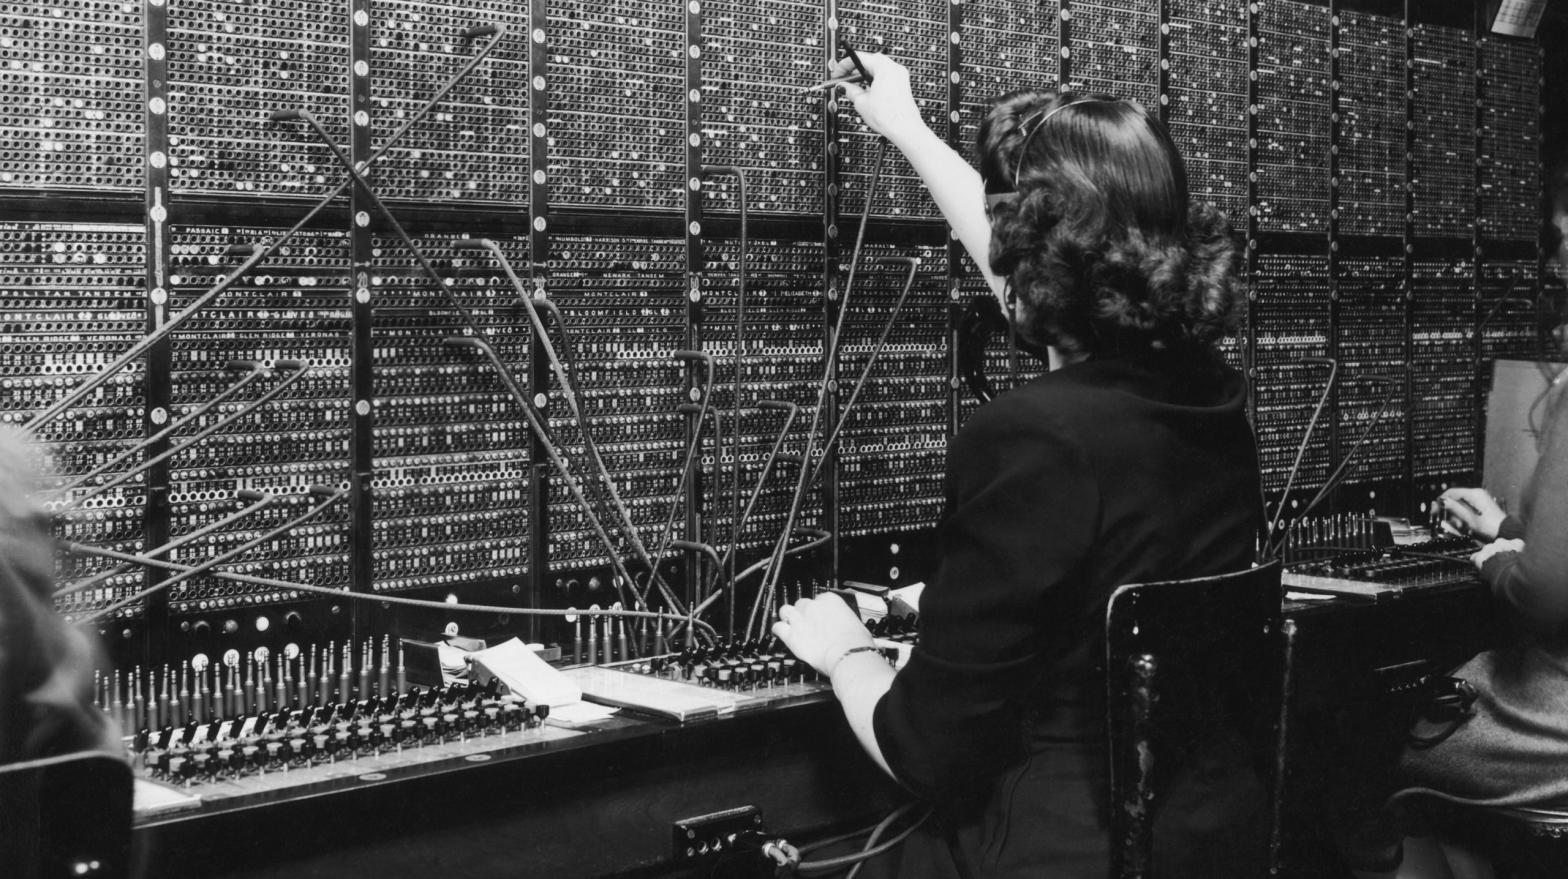 A switchboard operator at work, circa 1945. Frankly, this image alone is enough to give me stress-related nightmares. (Photo: Welgos/Hulton Archive, Getty Images)